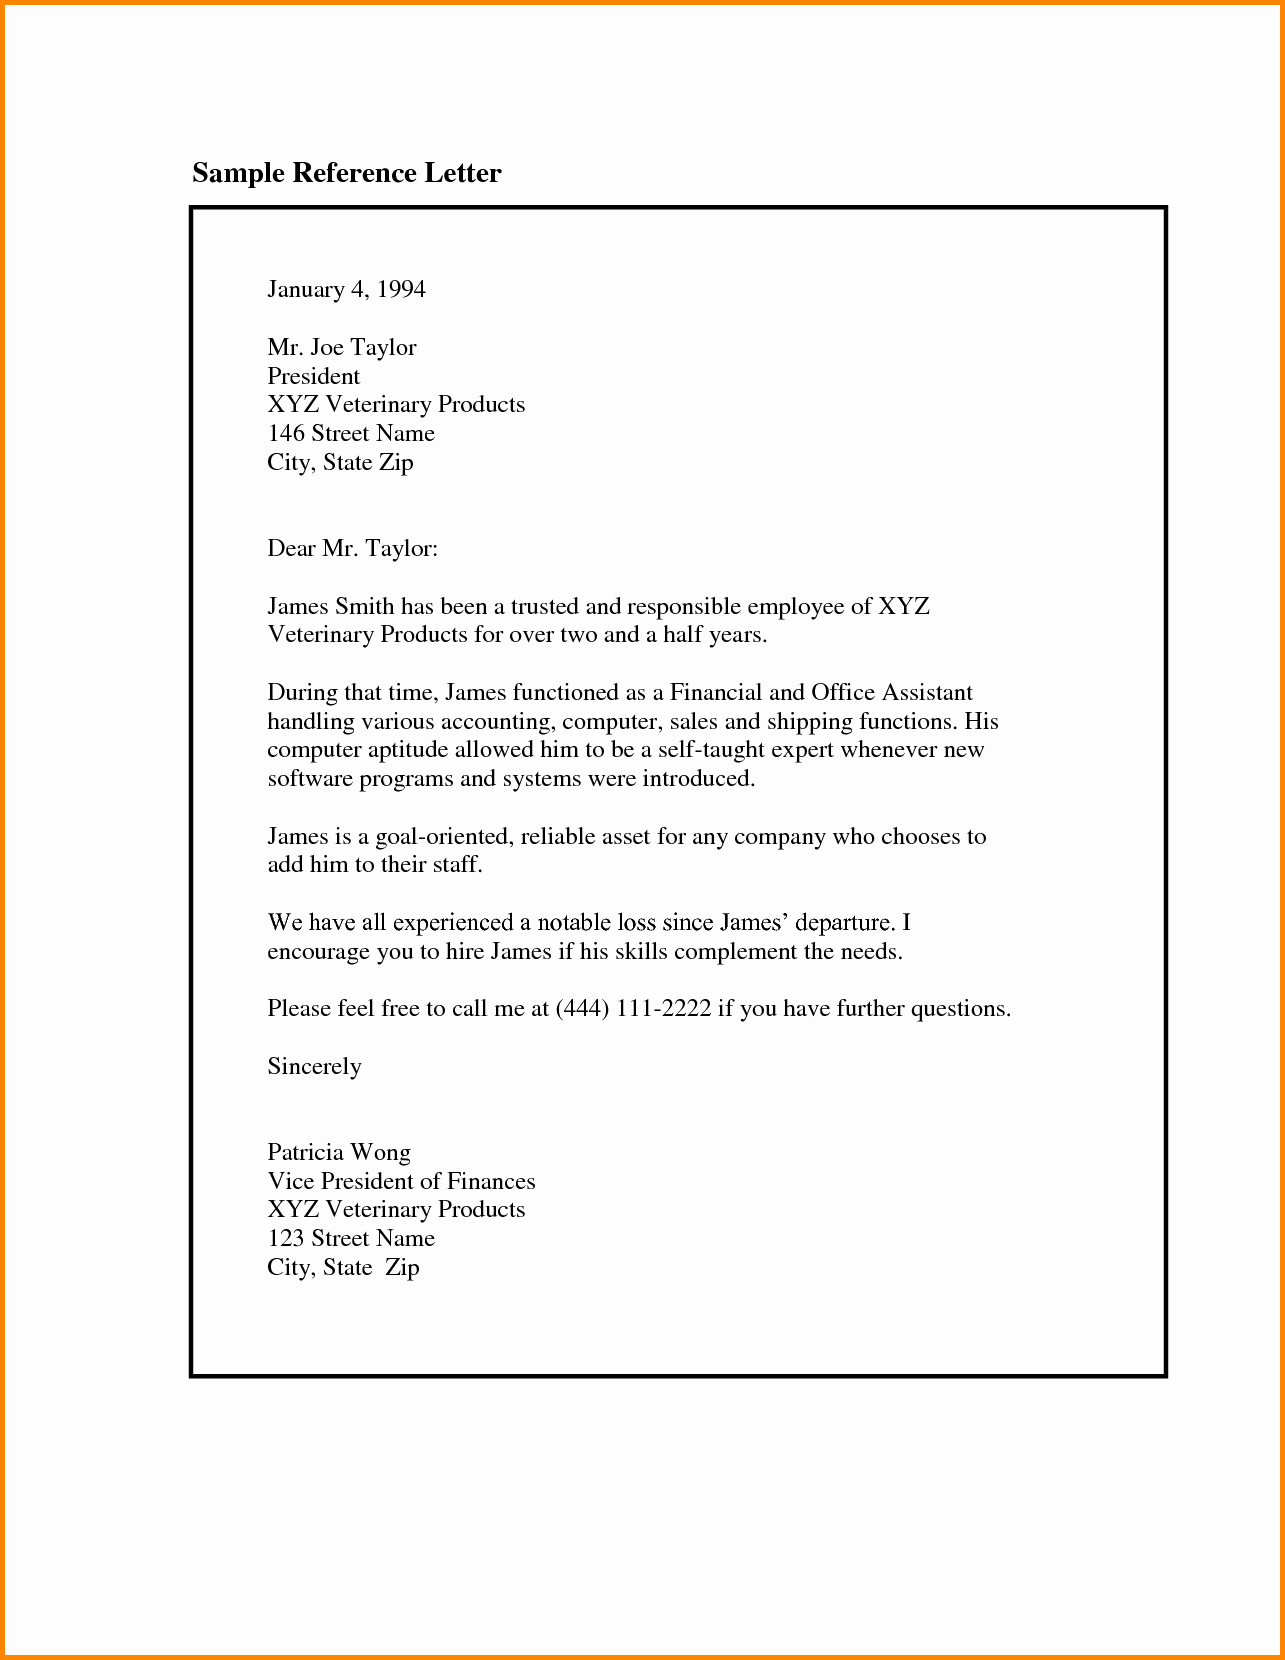 Sample Reference Letter for Employee Inspirational 8 Employee Reference Letter Sample